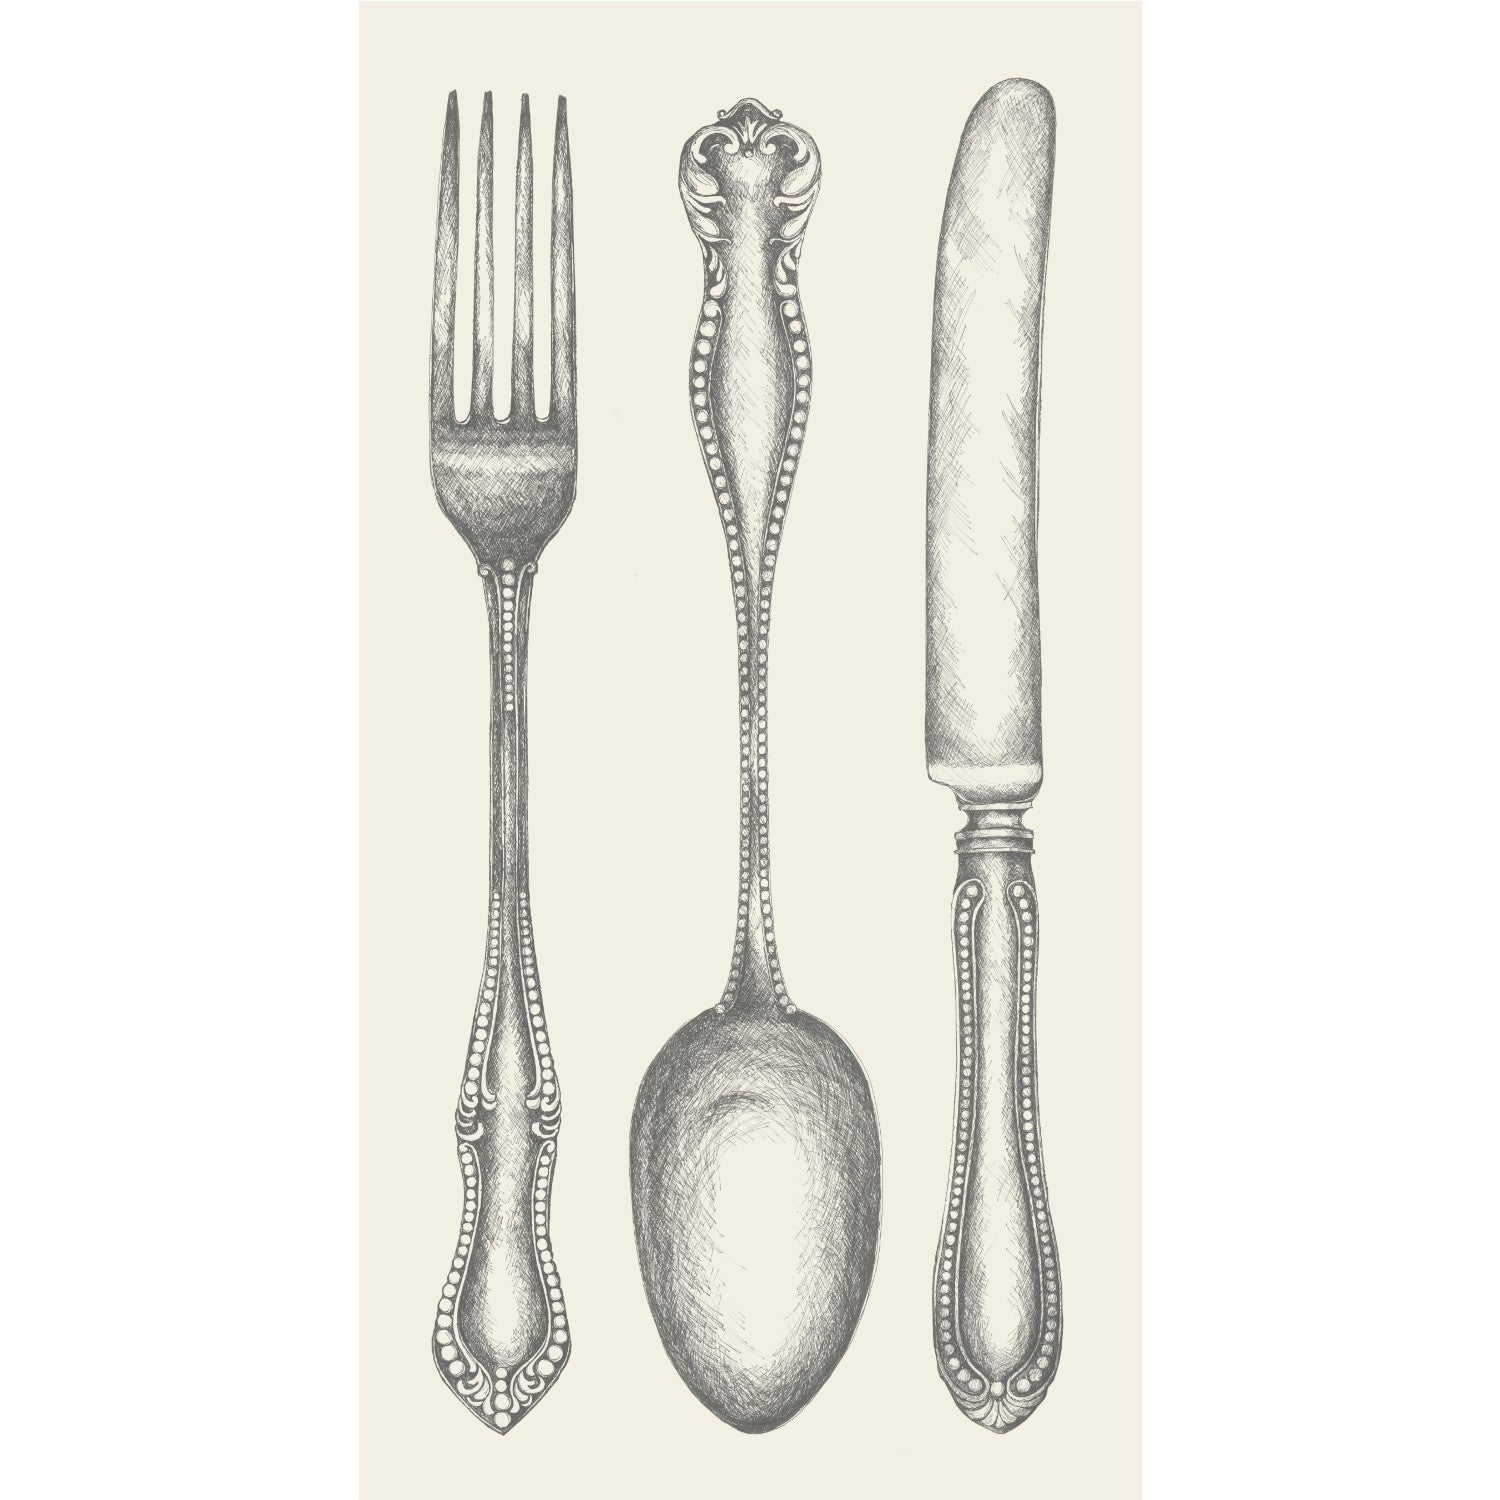 A black and white drawing of a fork, knife and spoon, perfect for a Hester &amp; Cook Classic Cutlery Napkins-themed party or elegant table setting.